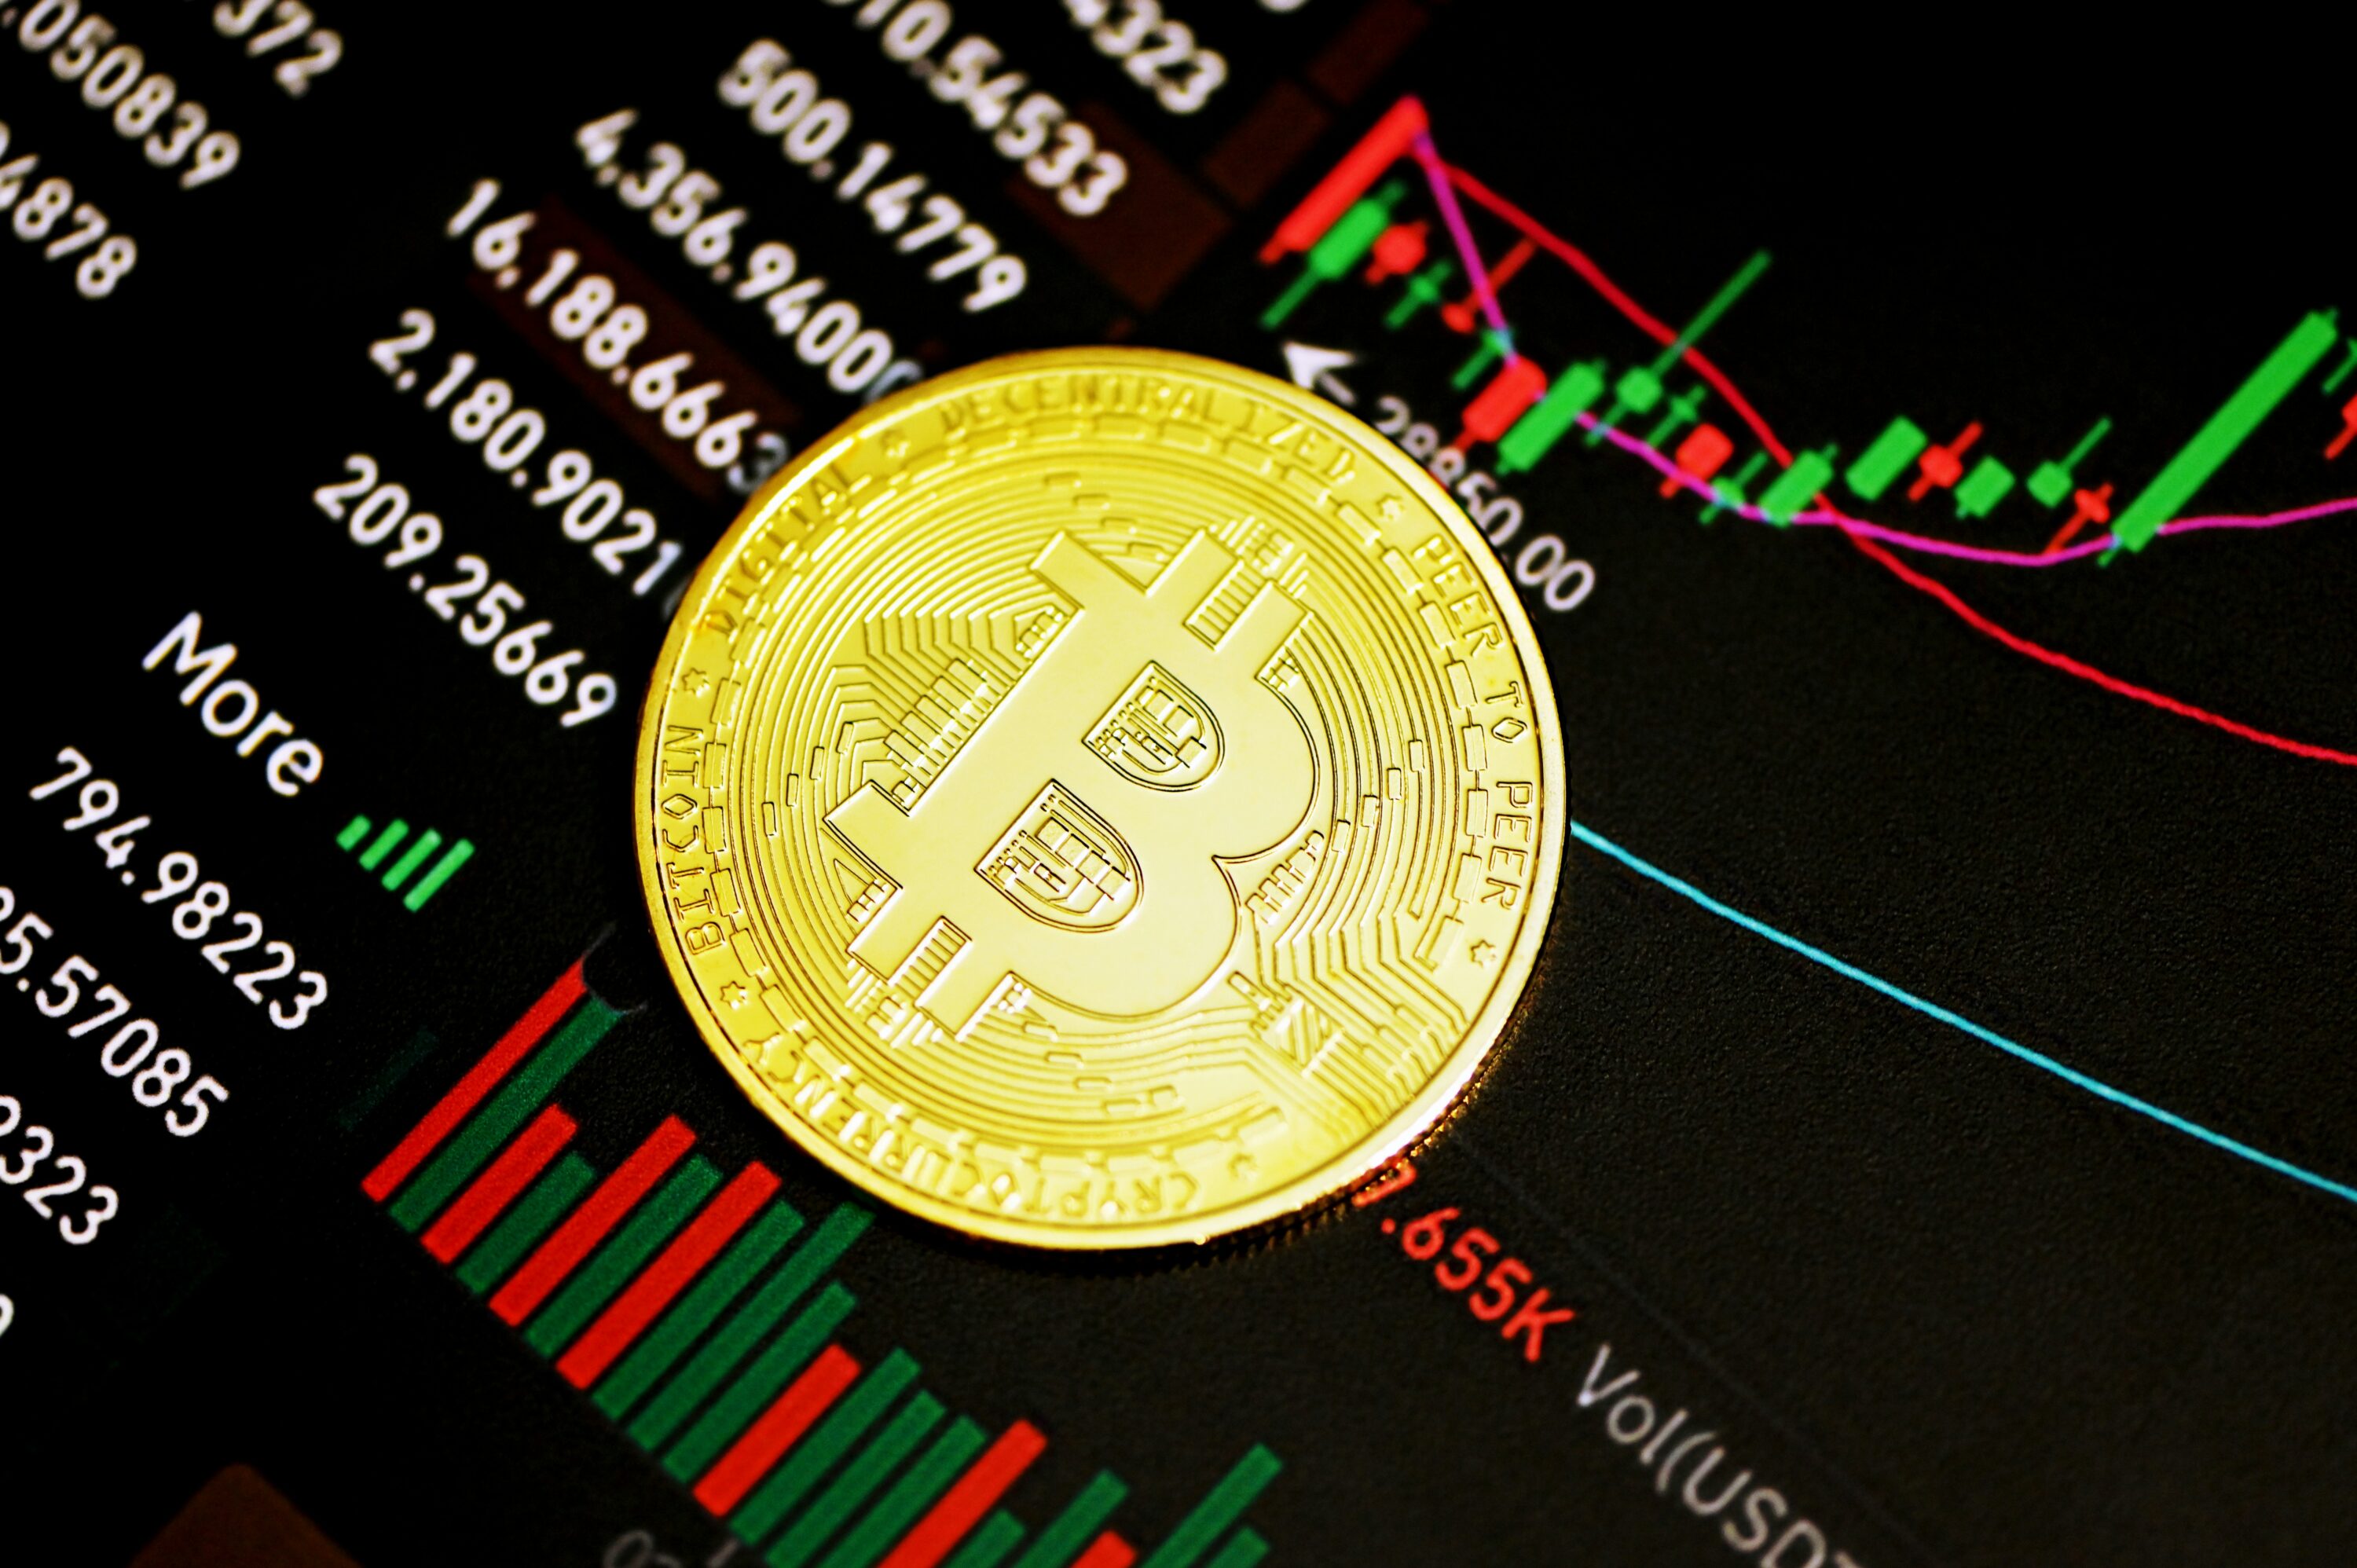 Bitcoin stored in exchange wallets hit highest since early May